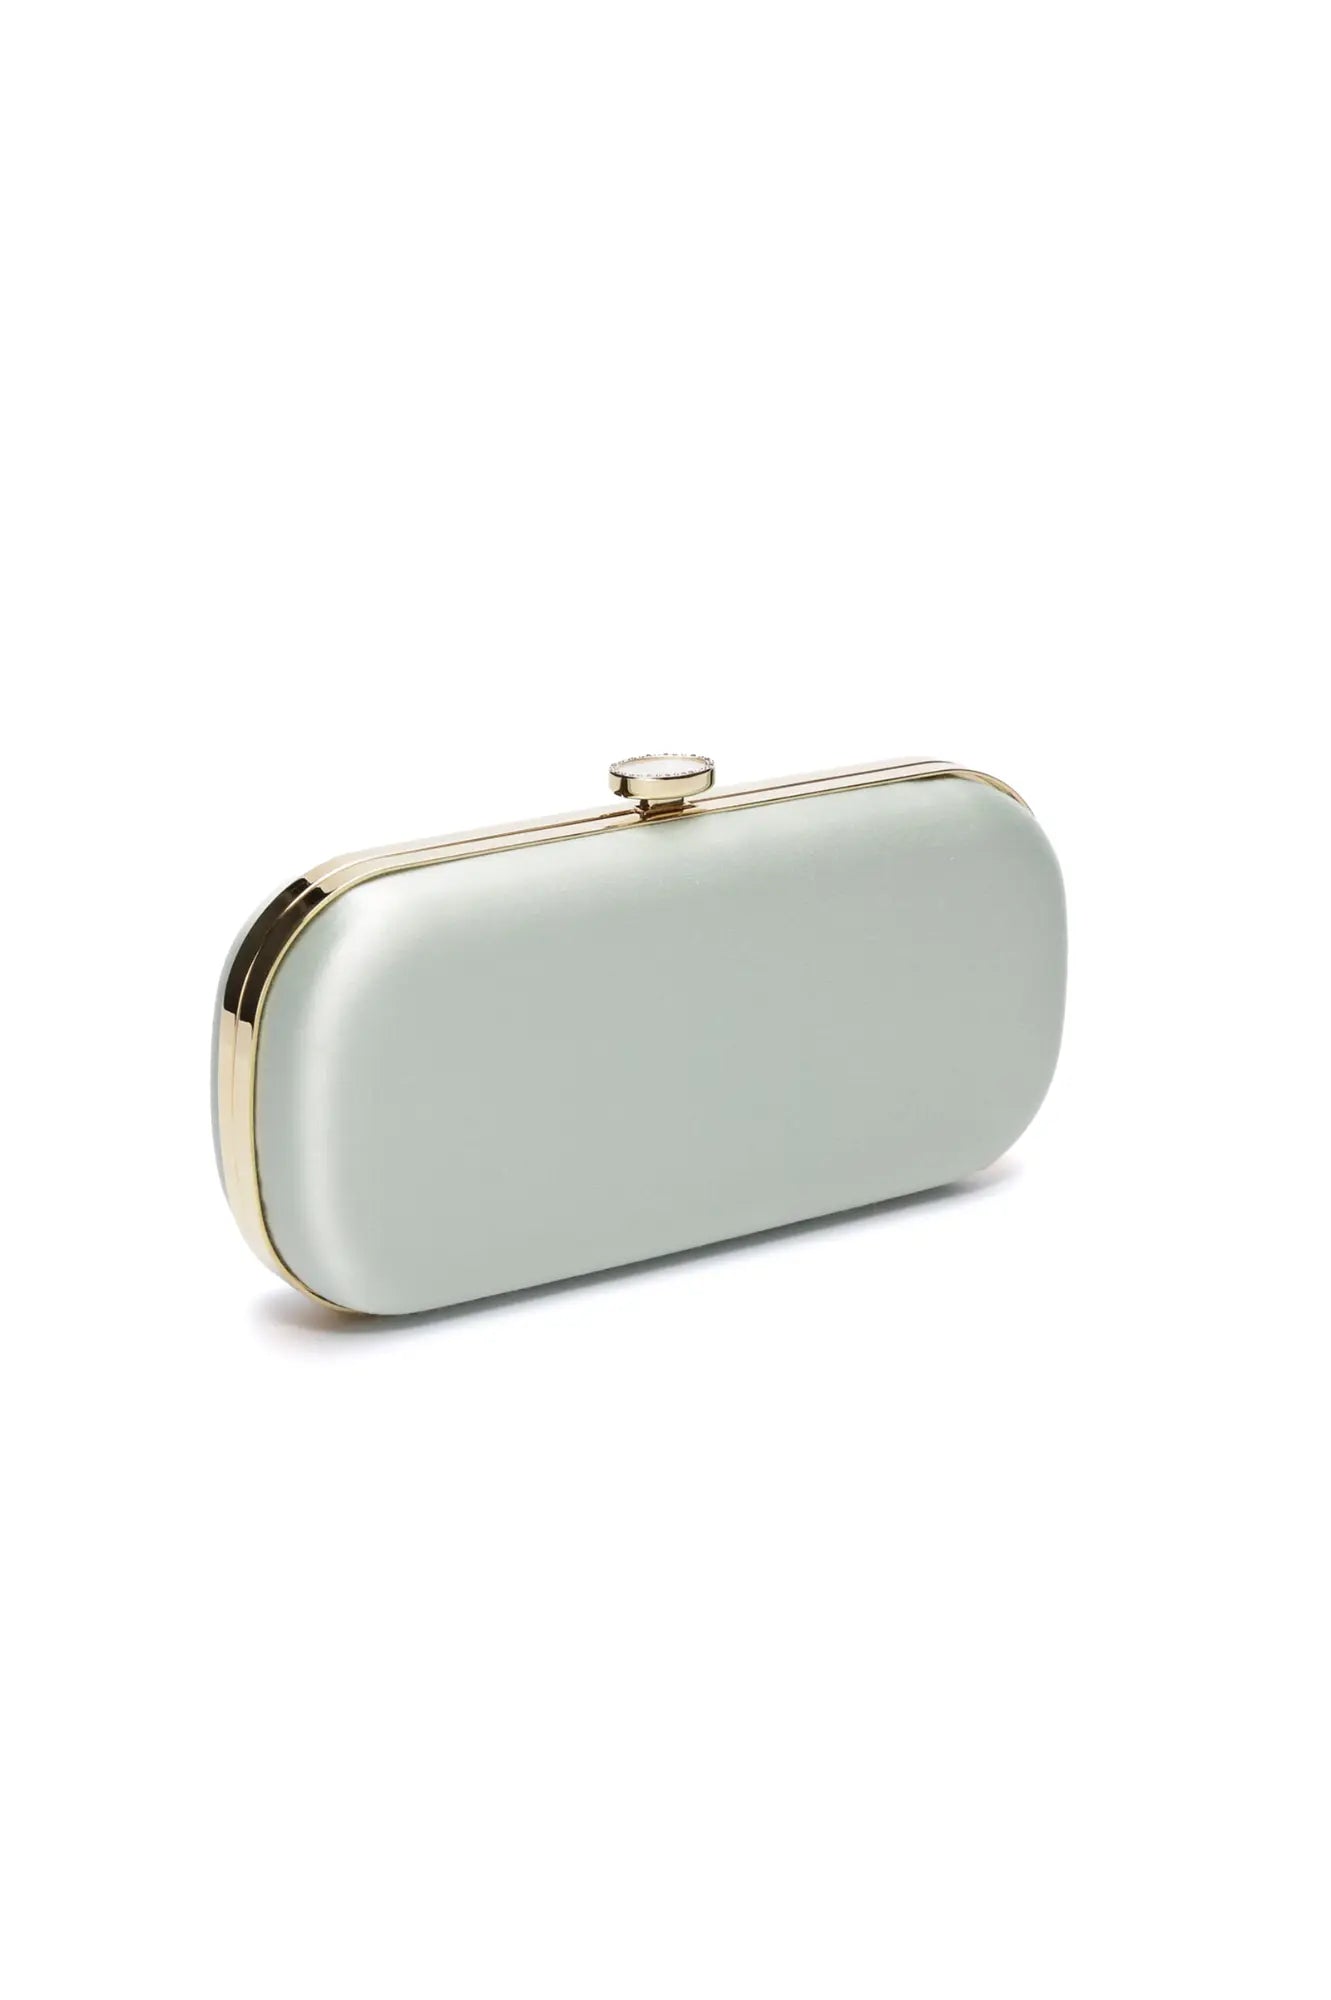 A pale-colored Bella Clutch Sage Green Satin Grande with a metallic clasp on a white background from The Bella Rosa Collection.